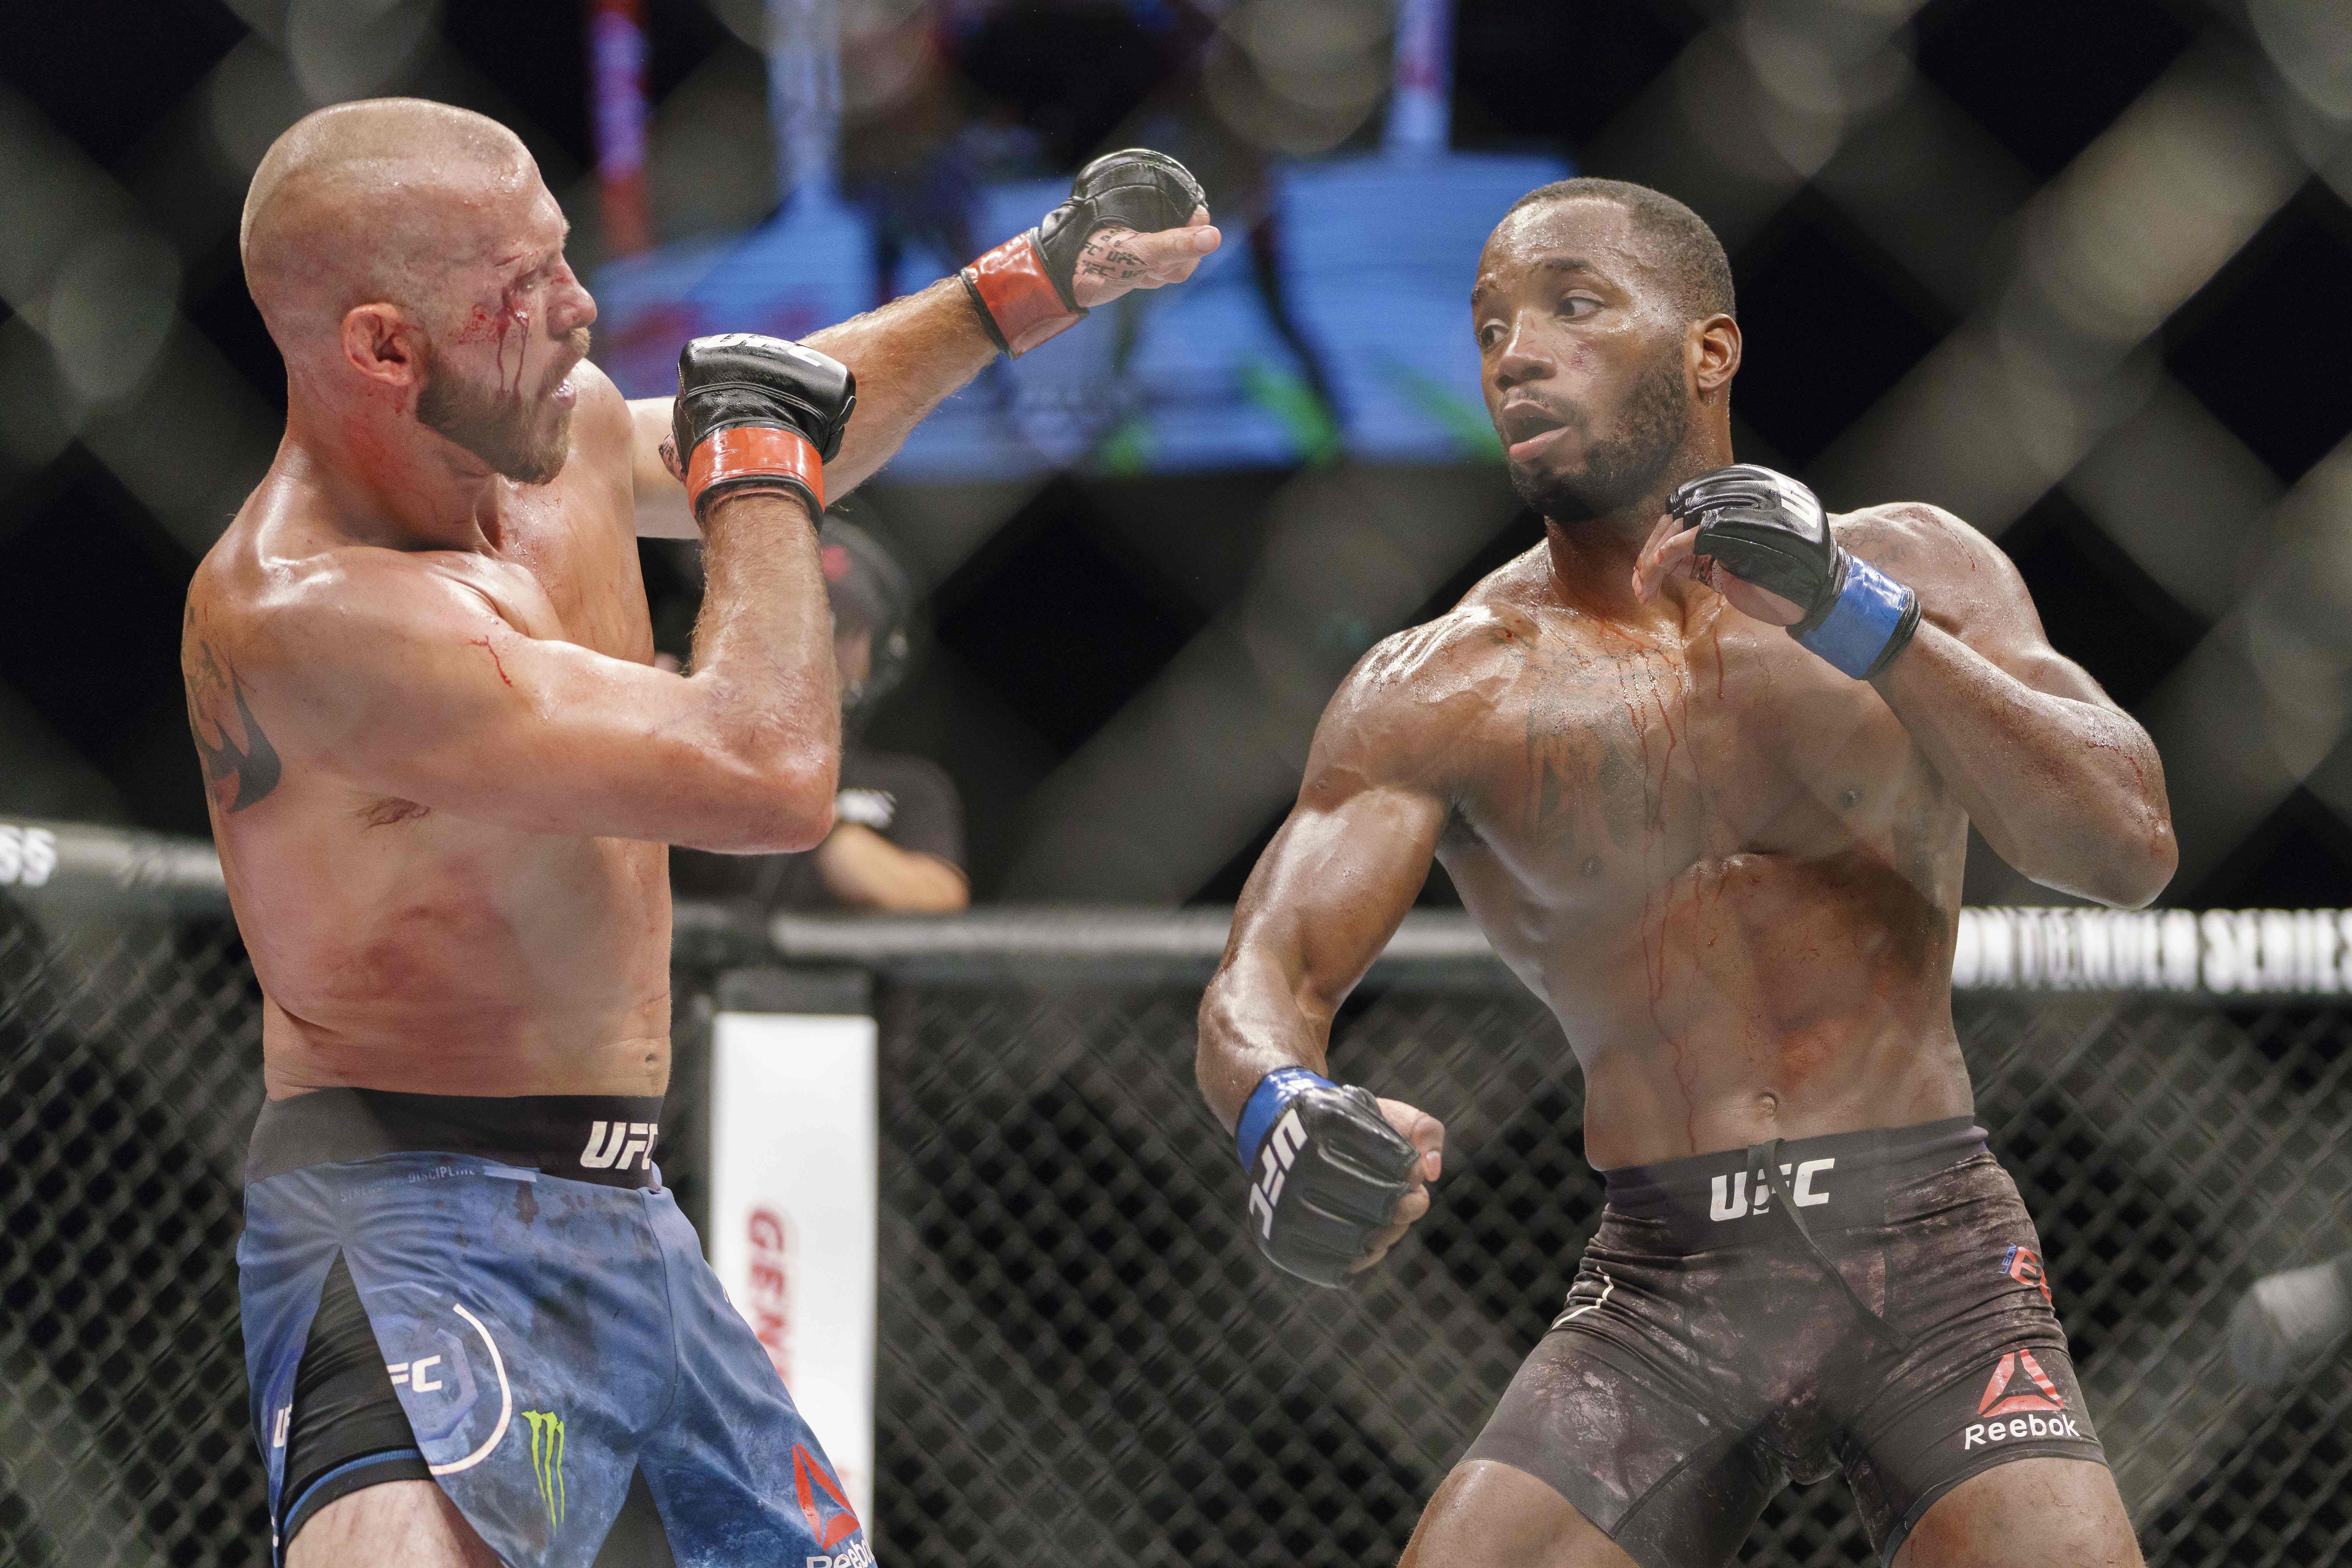 Edwards en route to victory over Donald Cerrone in 2018